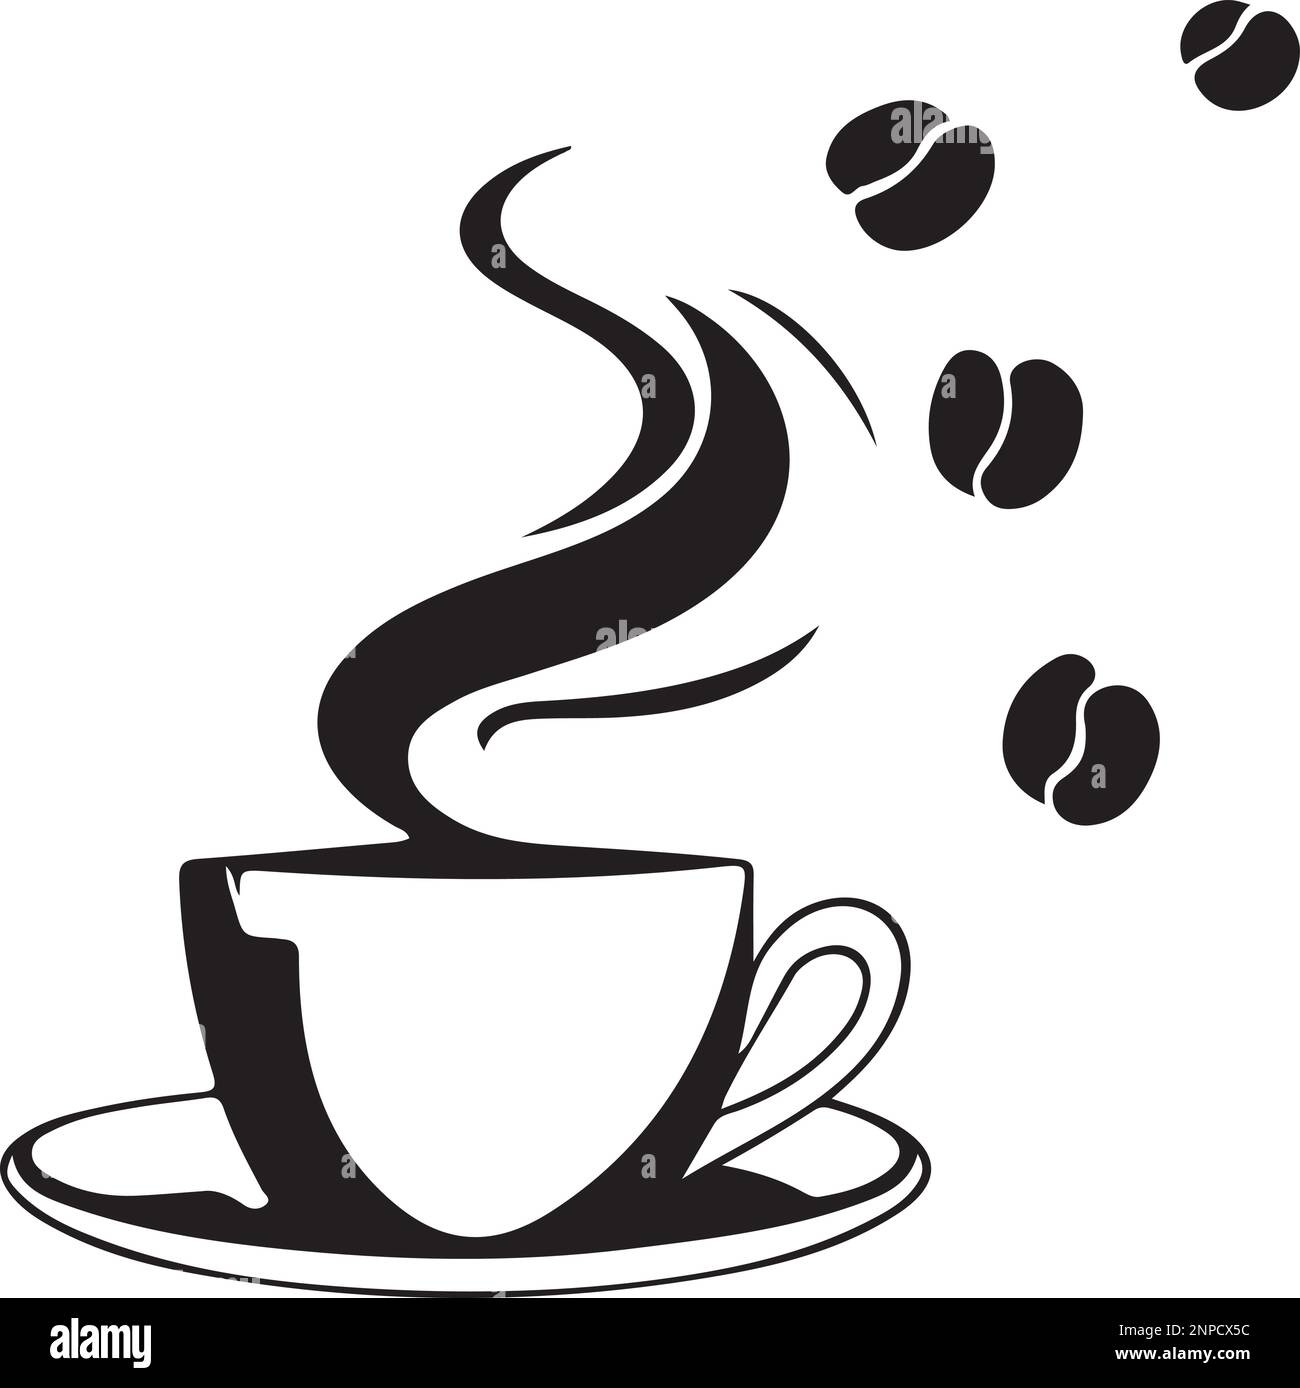 https://c8.alamy.com/comp/2NPCX5C/minimalist-black-and-white-cup-of-tea-or-coffee-with-steam-vector-illustration-2NPCX5C.jpg